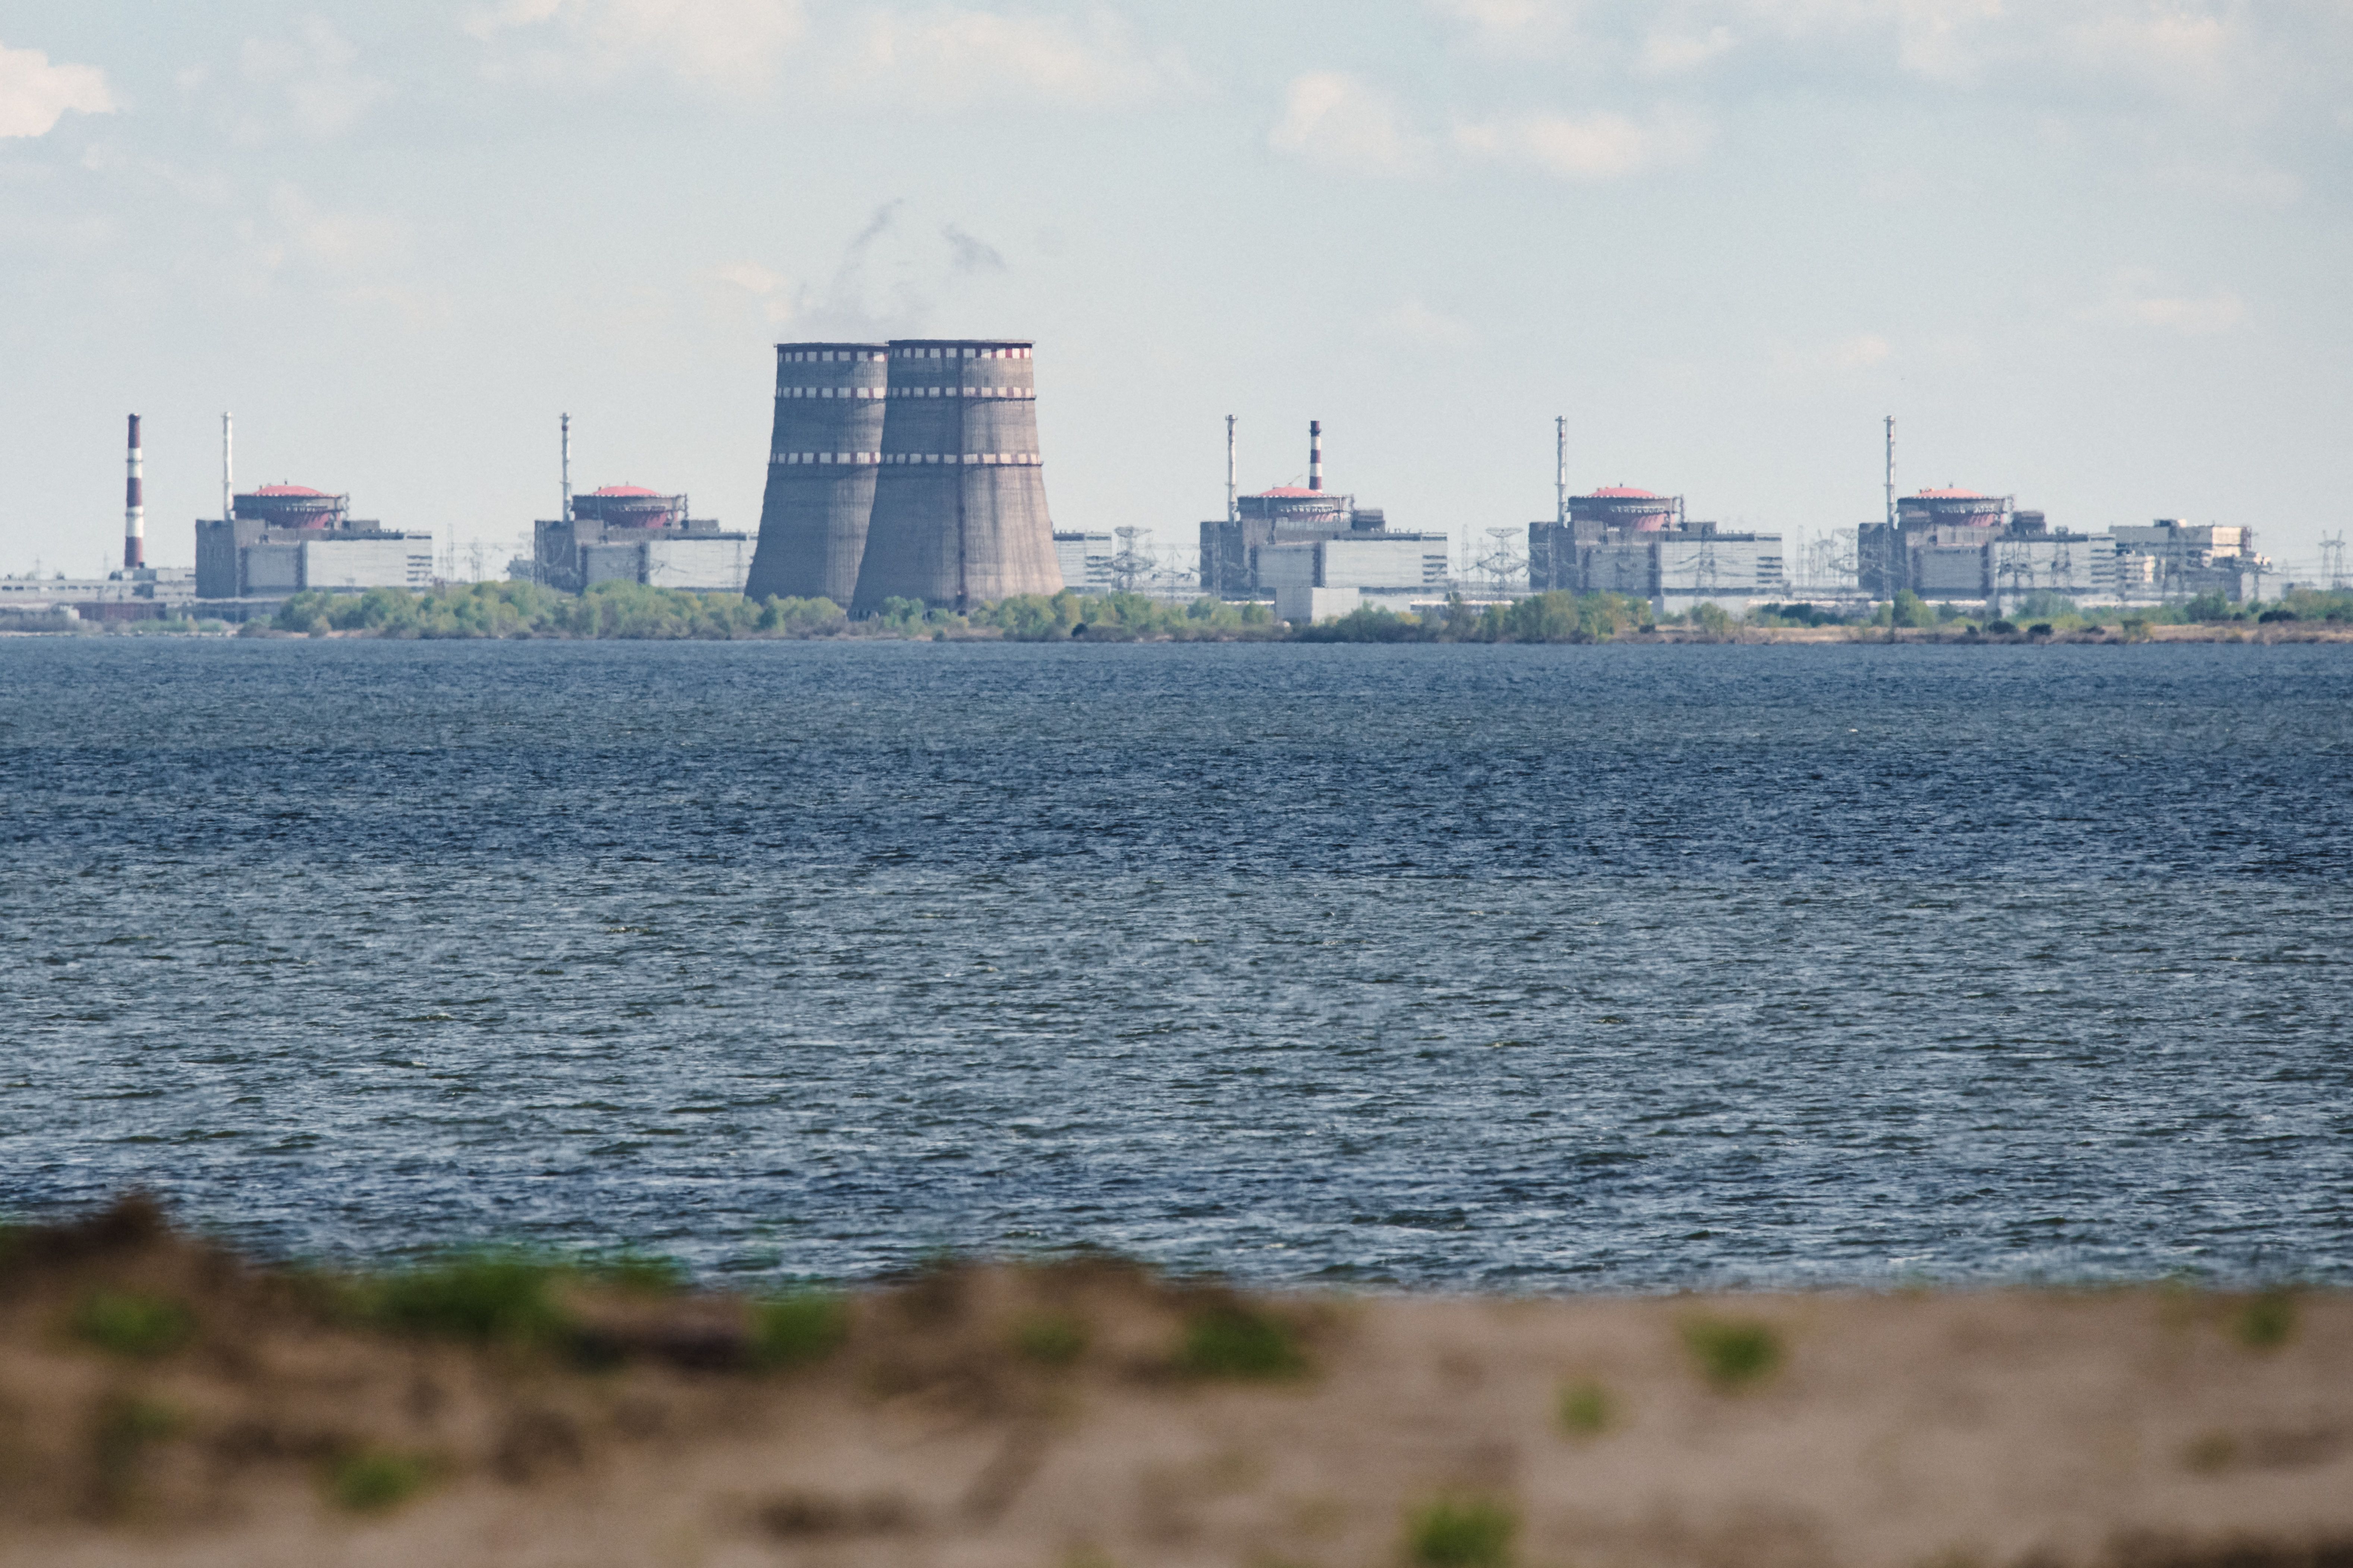 A general view shows the Zaporizhzhia nuclear power plant, located in the Russian-controlled area of ​​Enerhodar, seen from Nikopol on April 27, 2022.